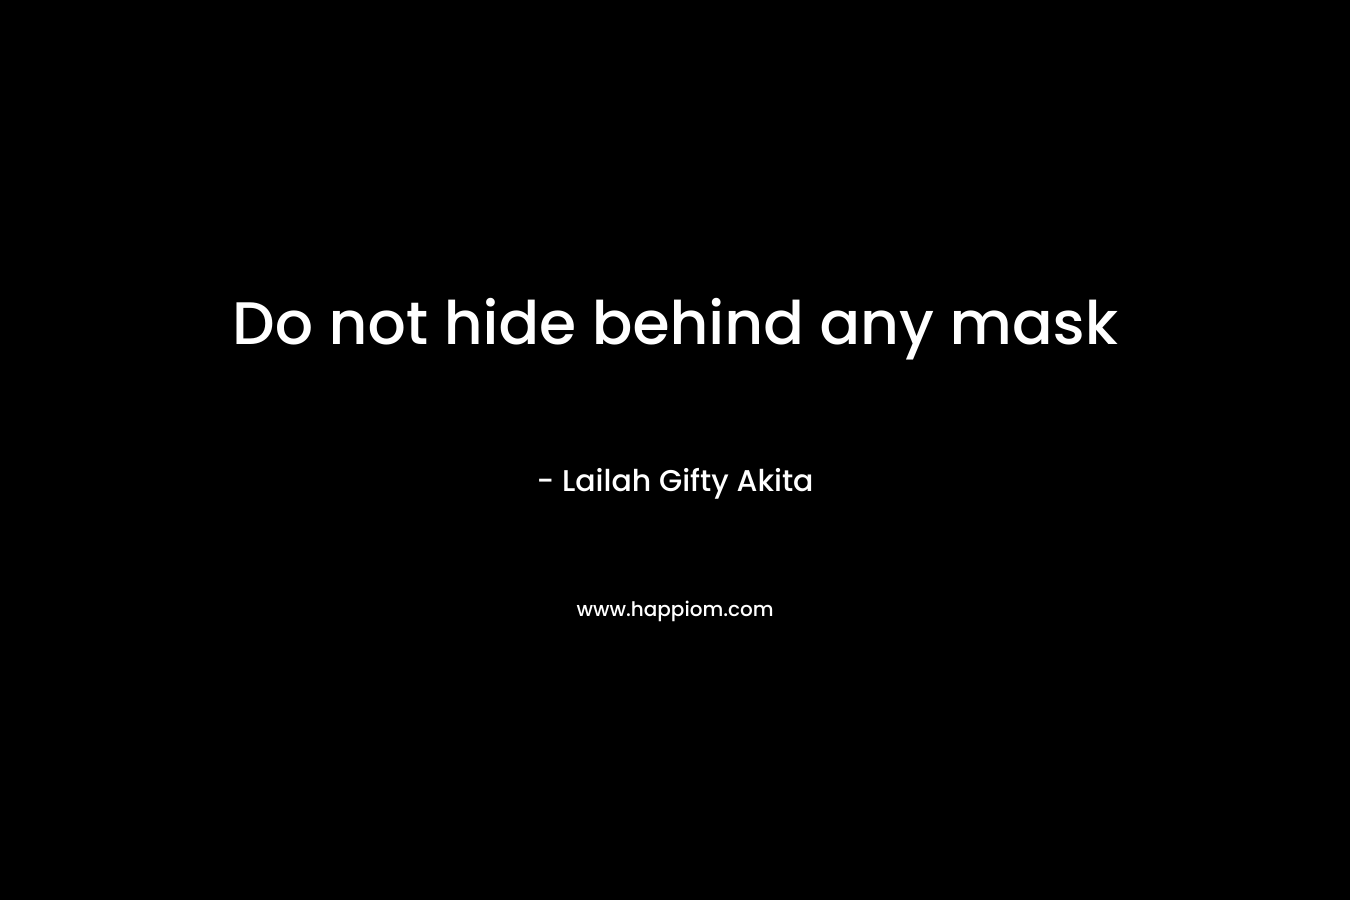 Do not hide behind any mask